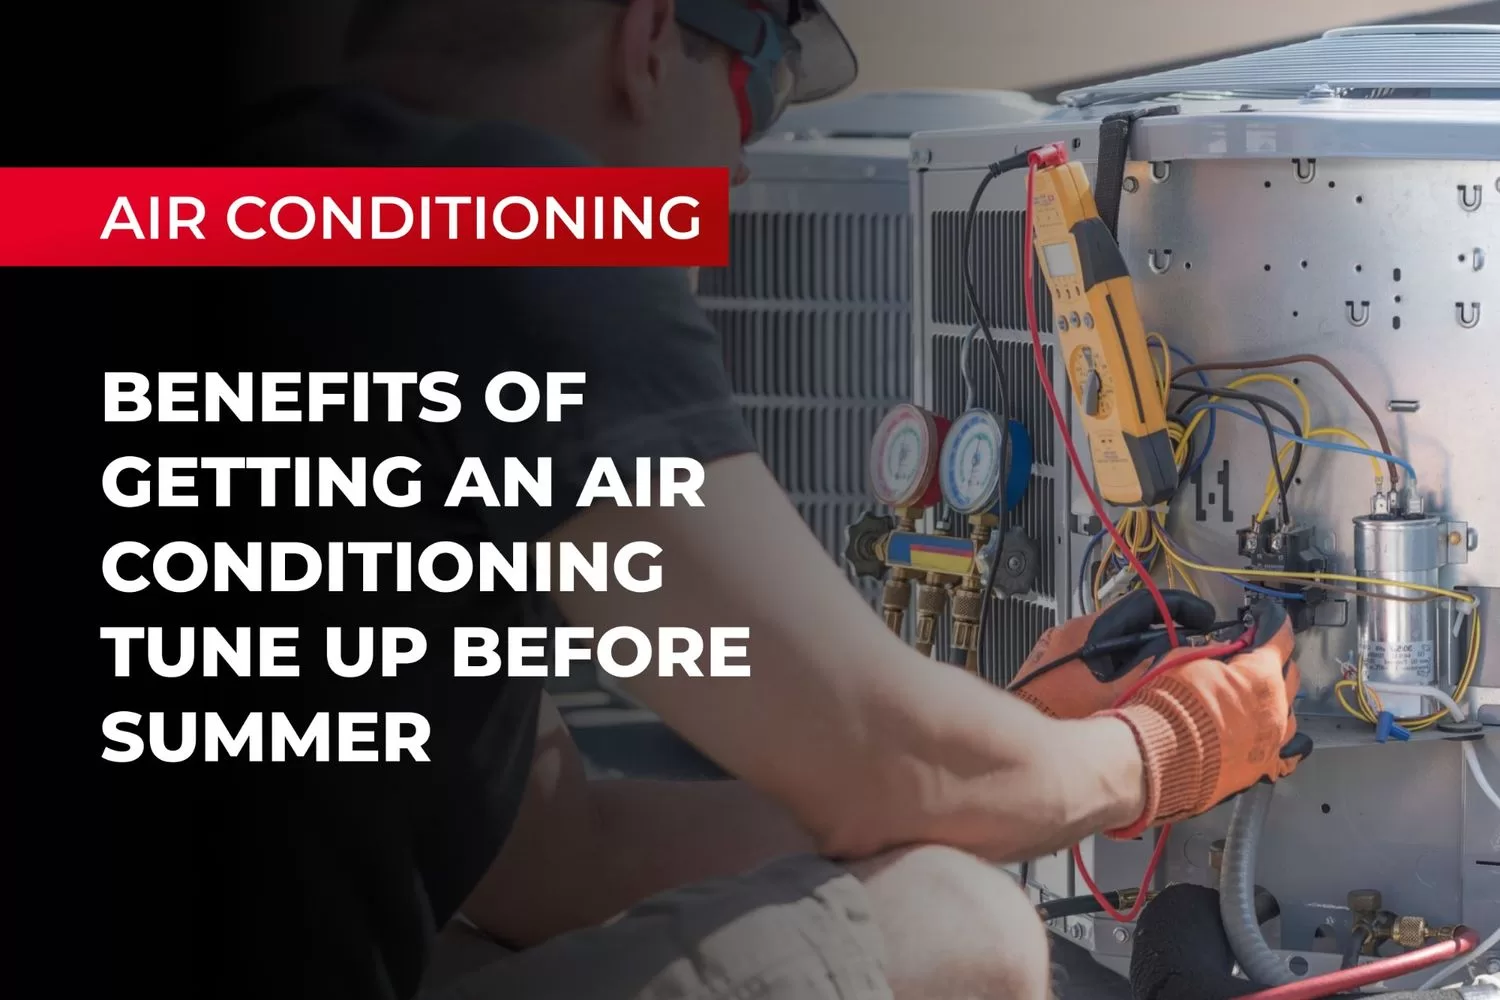 Benefits of Getting an Air Conditioning Tune Up Before Summer